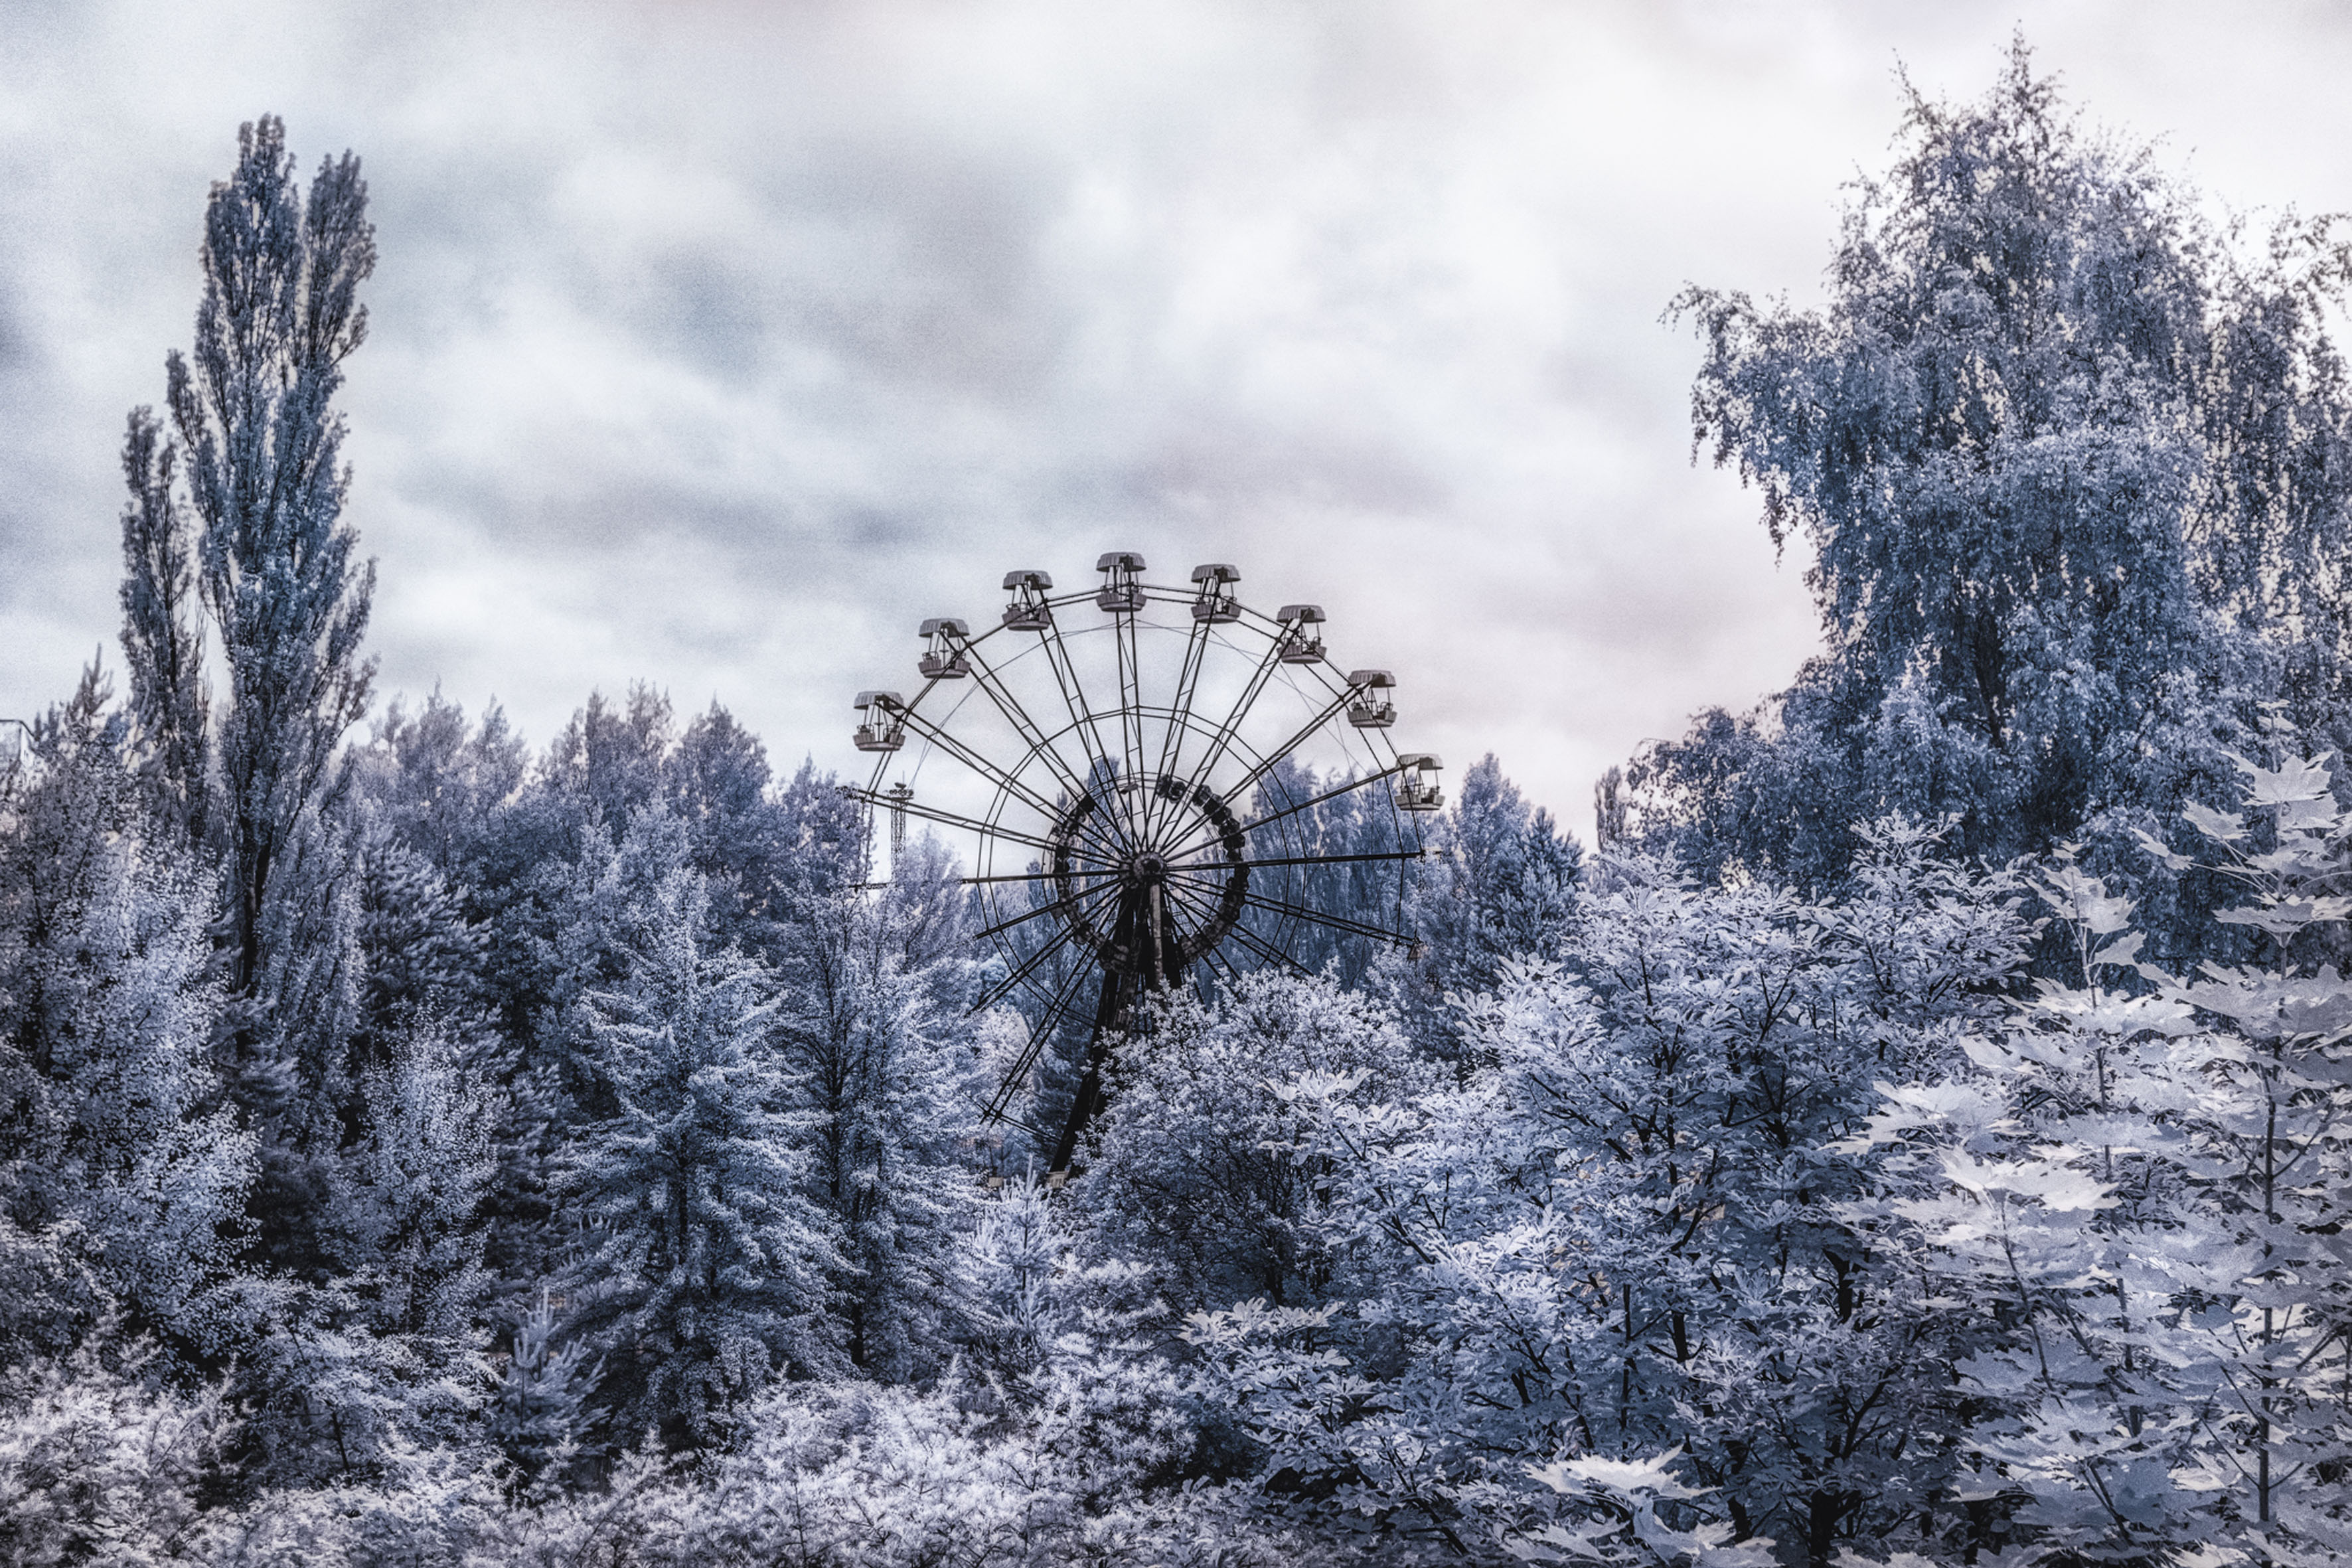 The Ferris wheel at the abandoned Pripyat Amusement Park can be seen from miles away